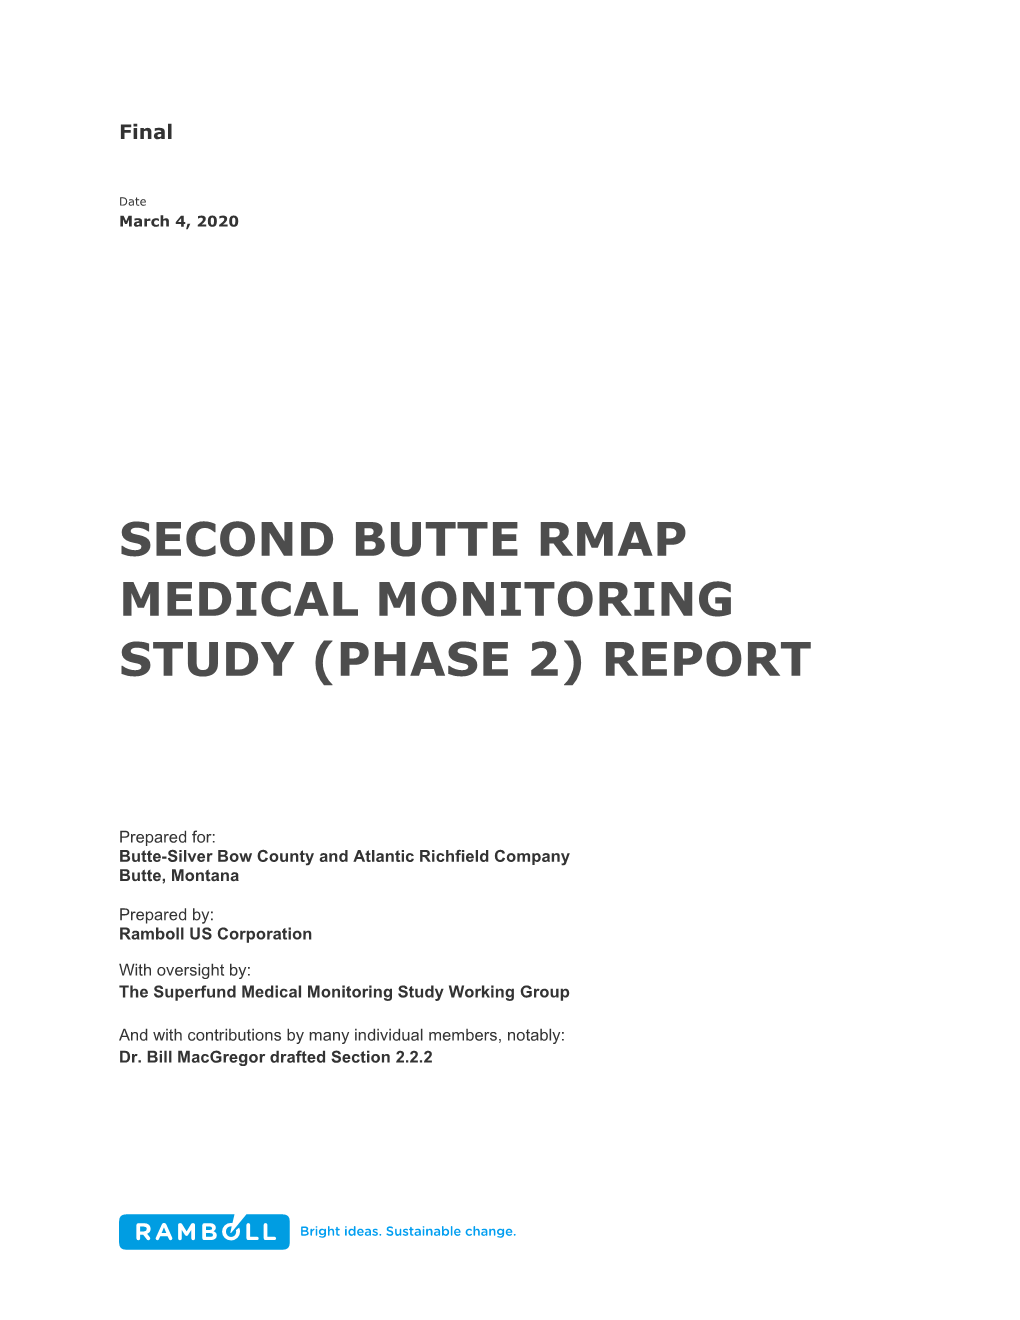 Second Butte Rmap Medical Monitoring Study (Phase 2) Report